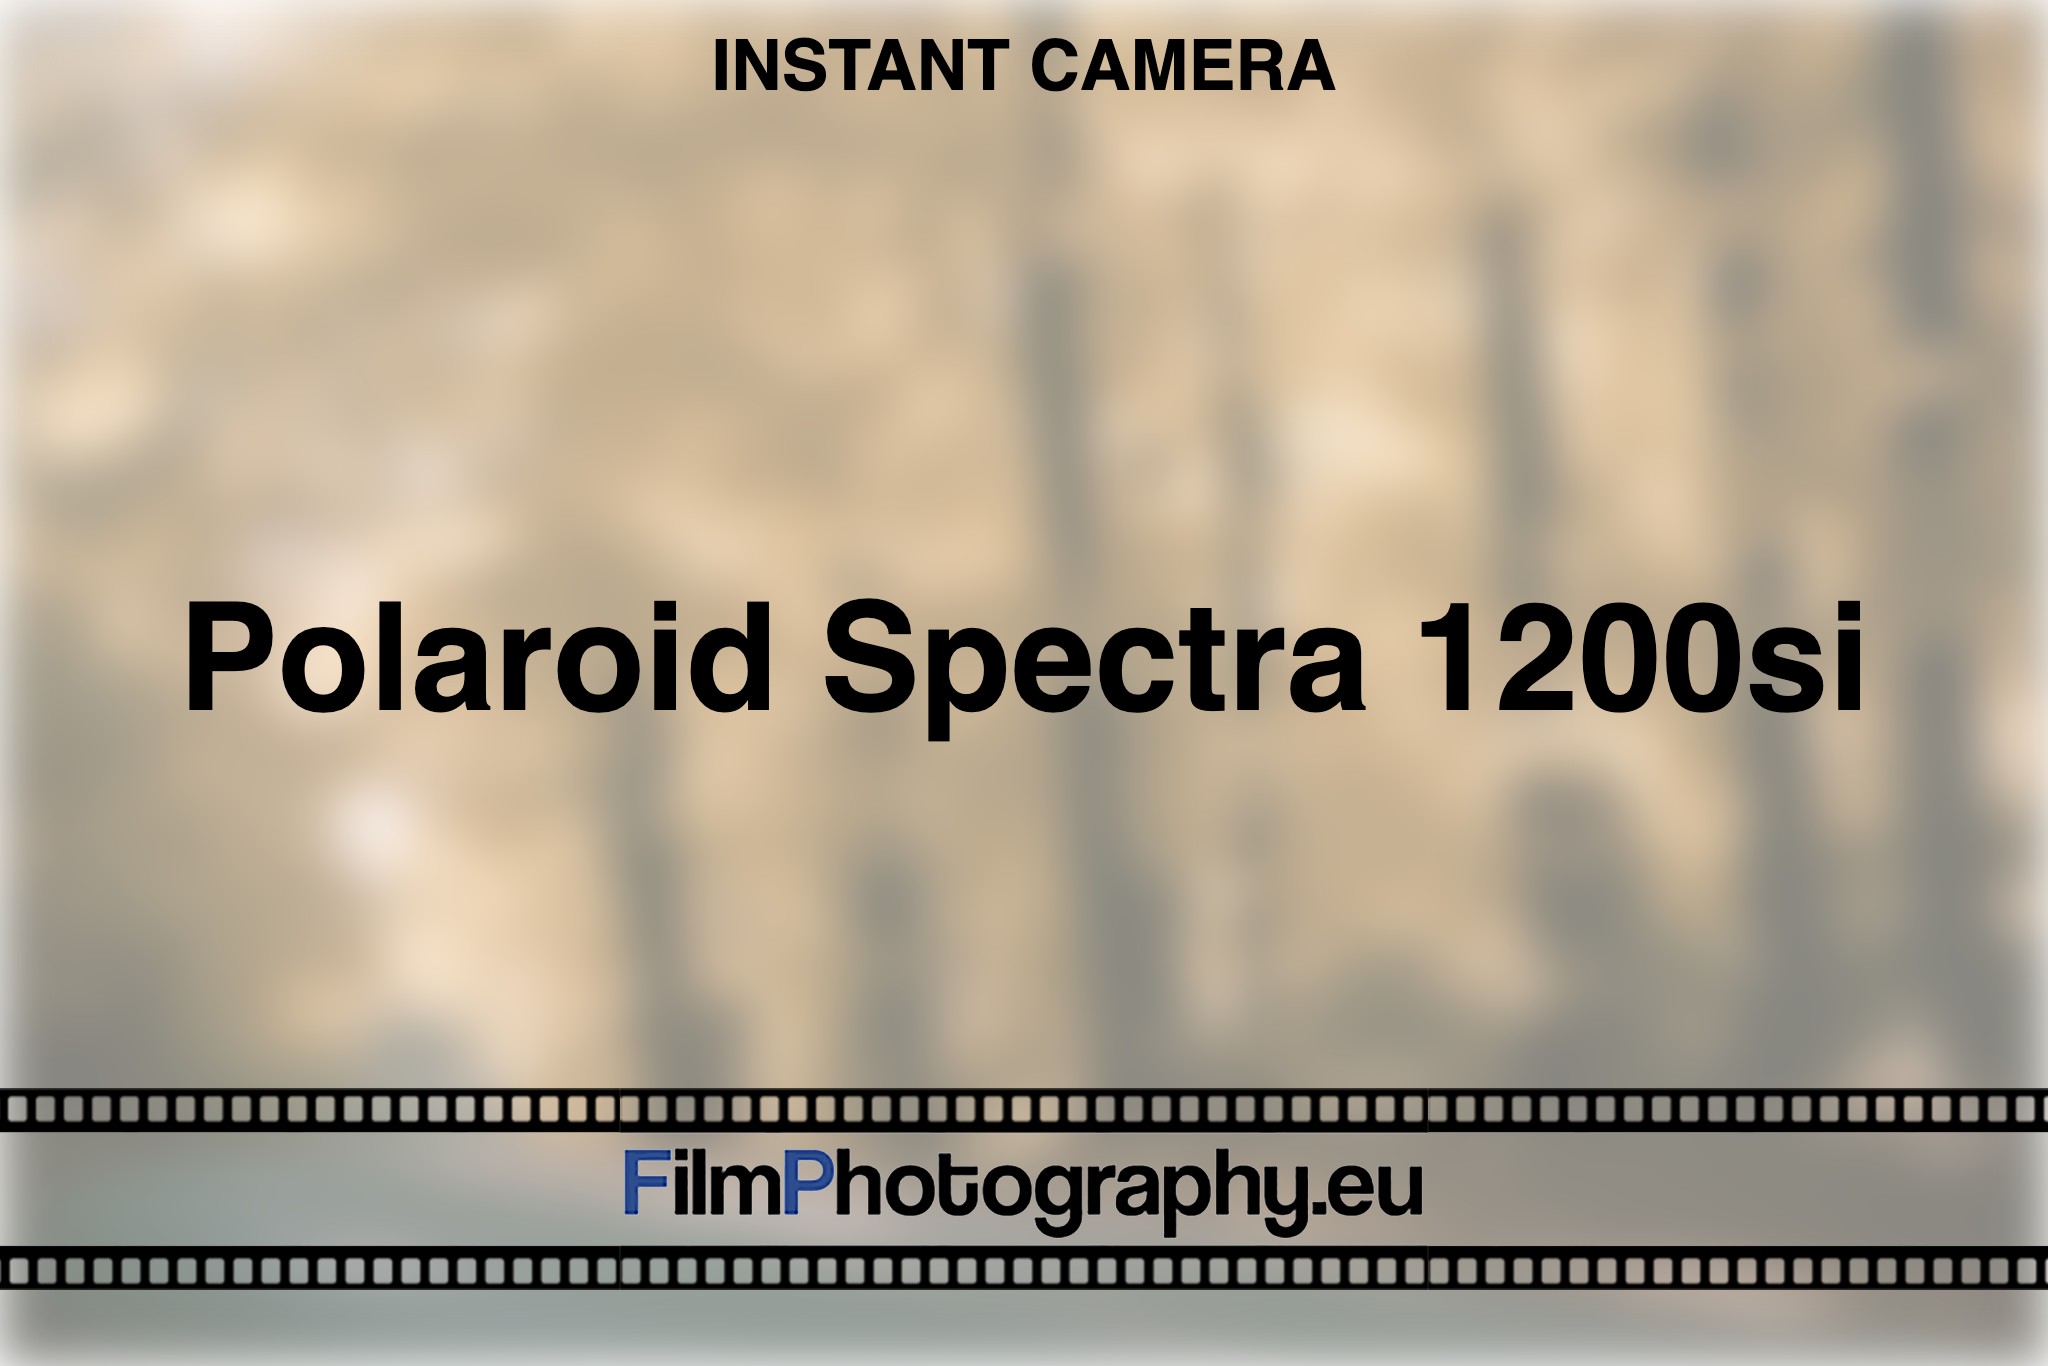 Polaroid Spectra 1200si | Guide for the instant camera